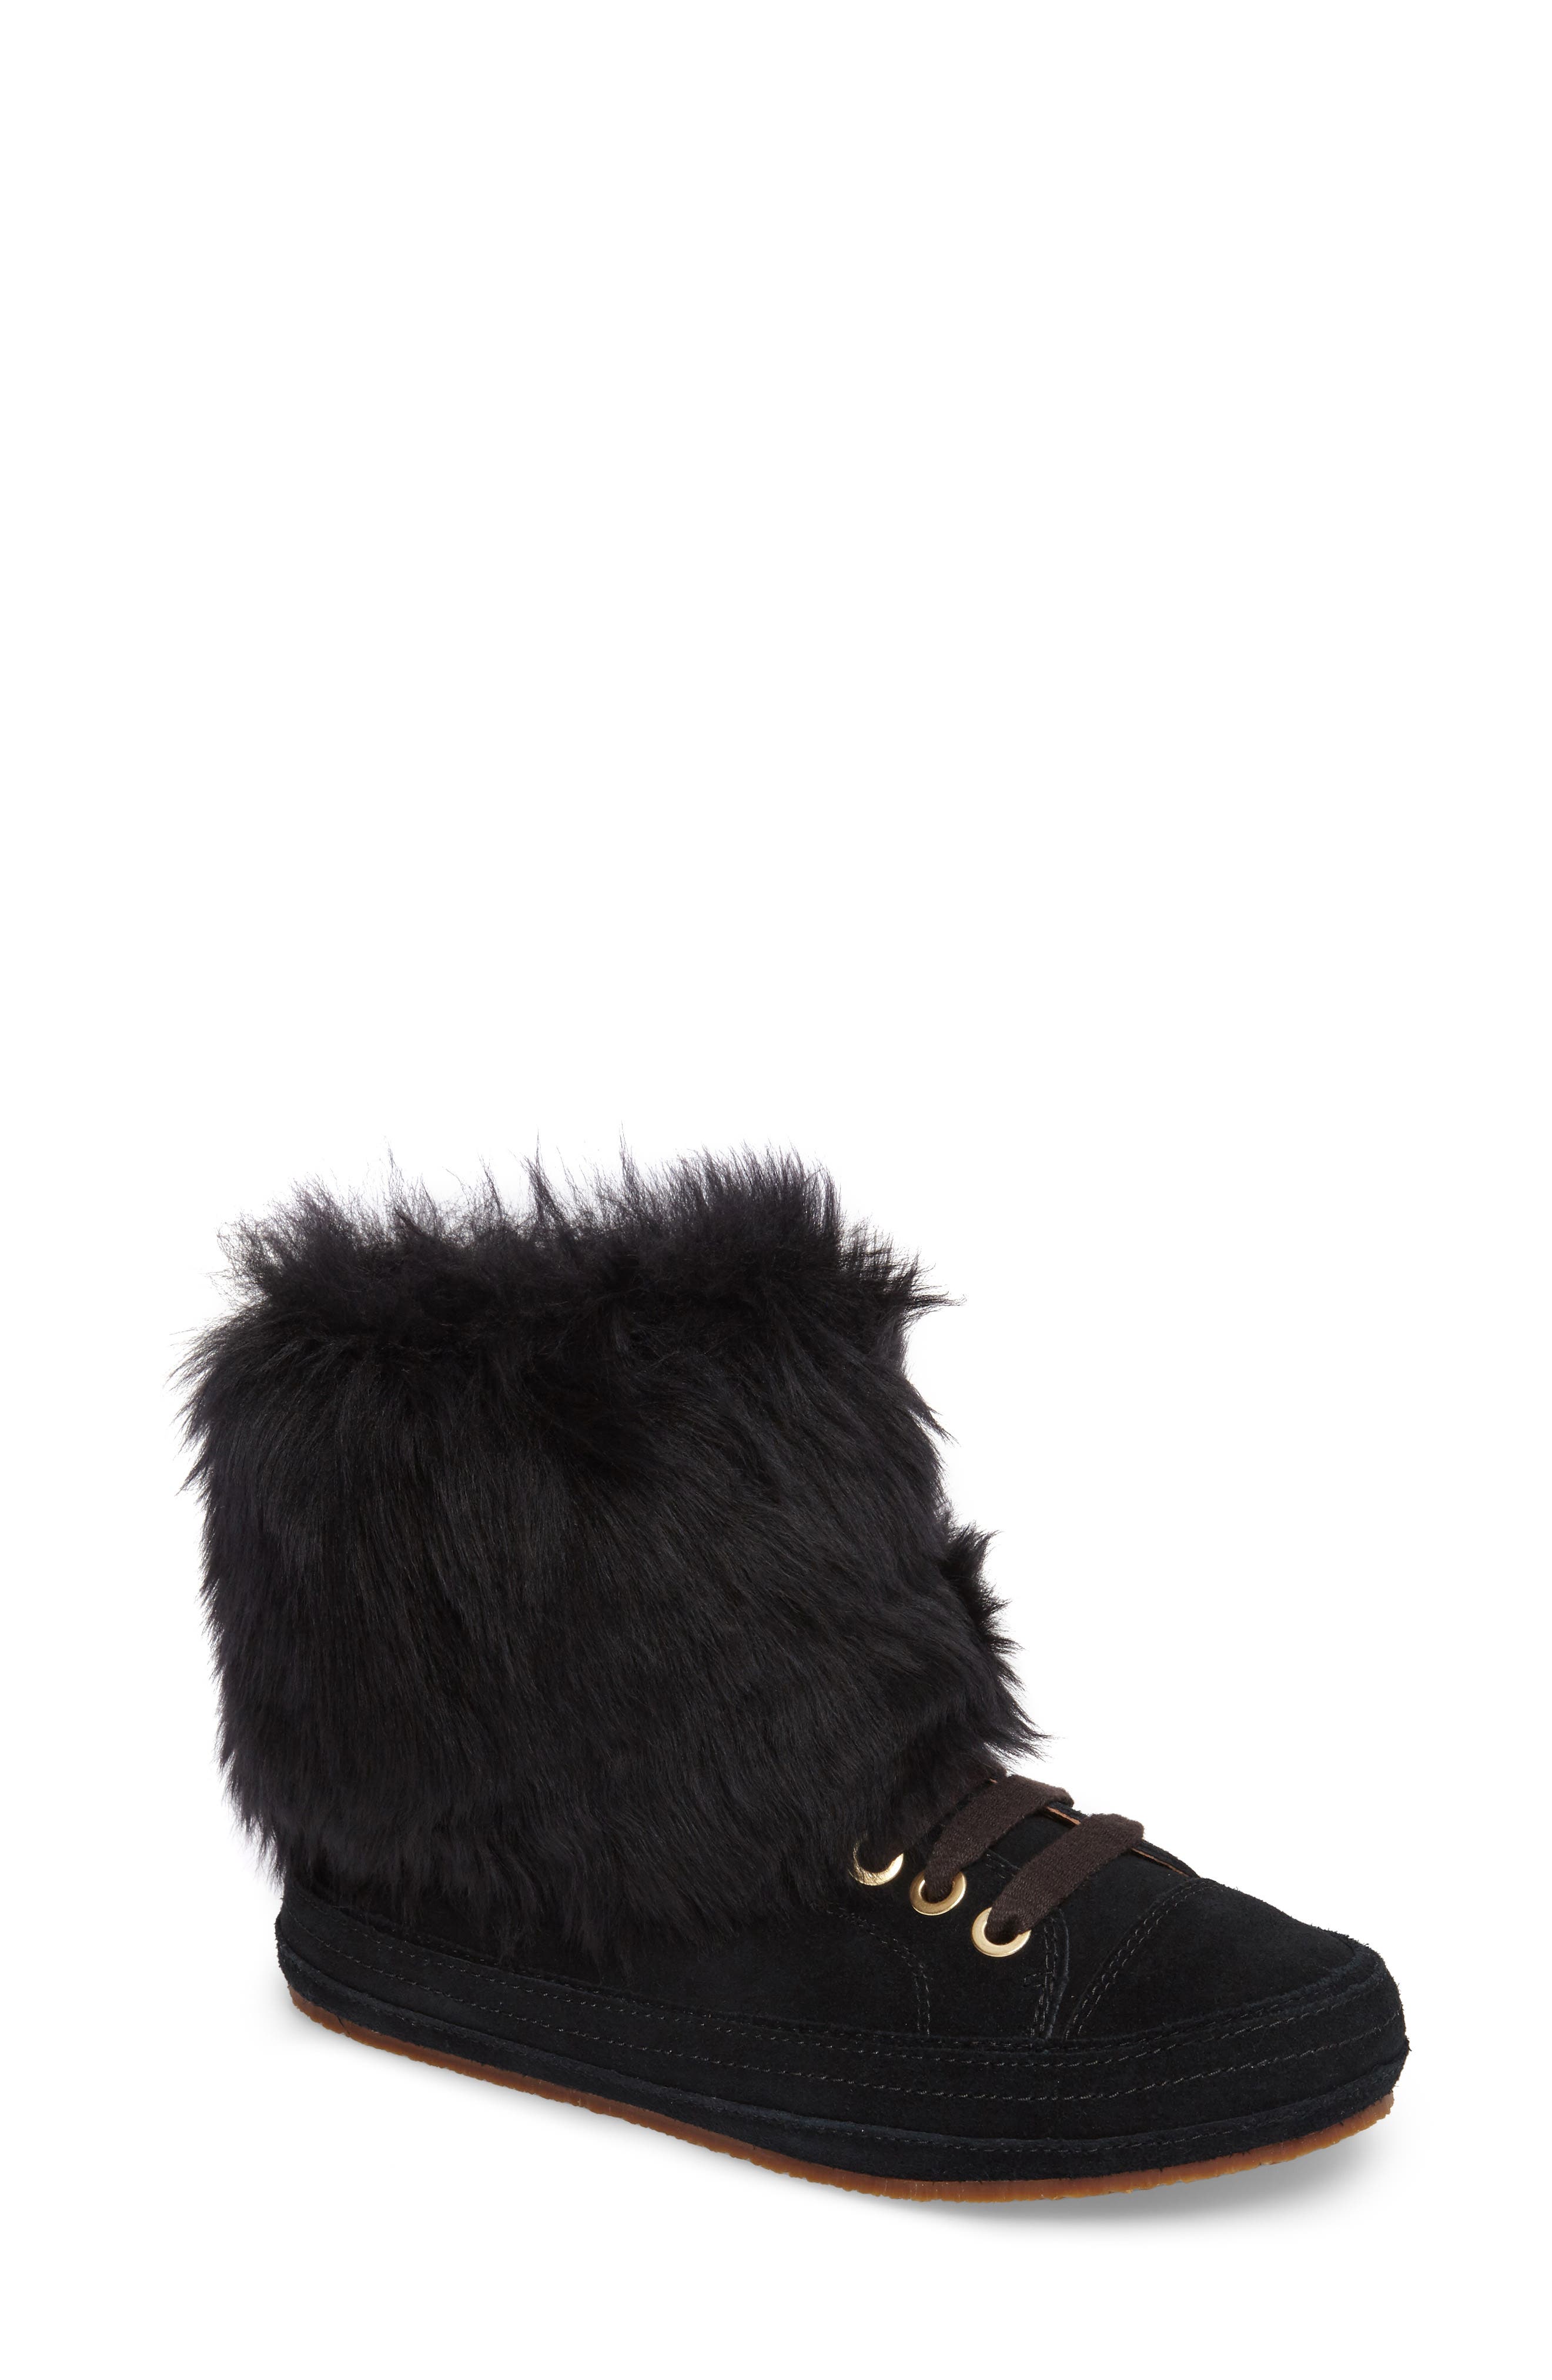 ugg sneaker with fur